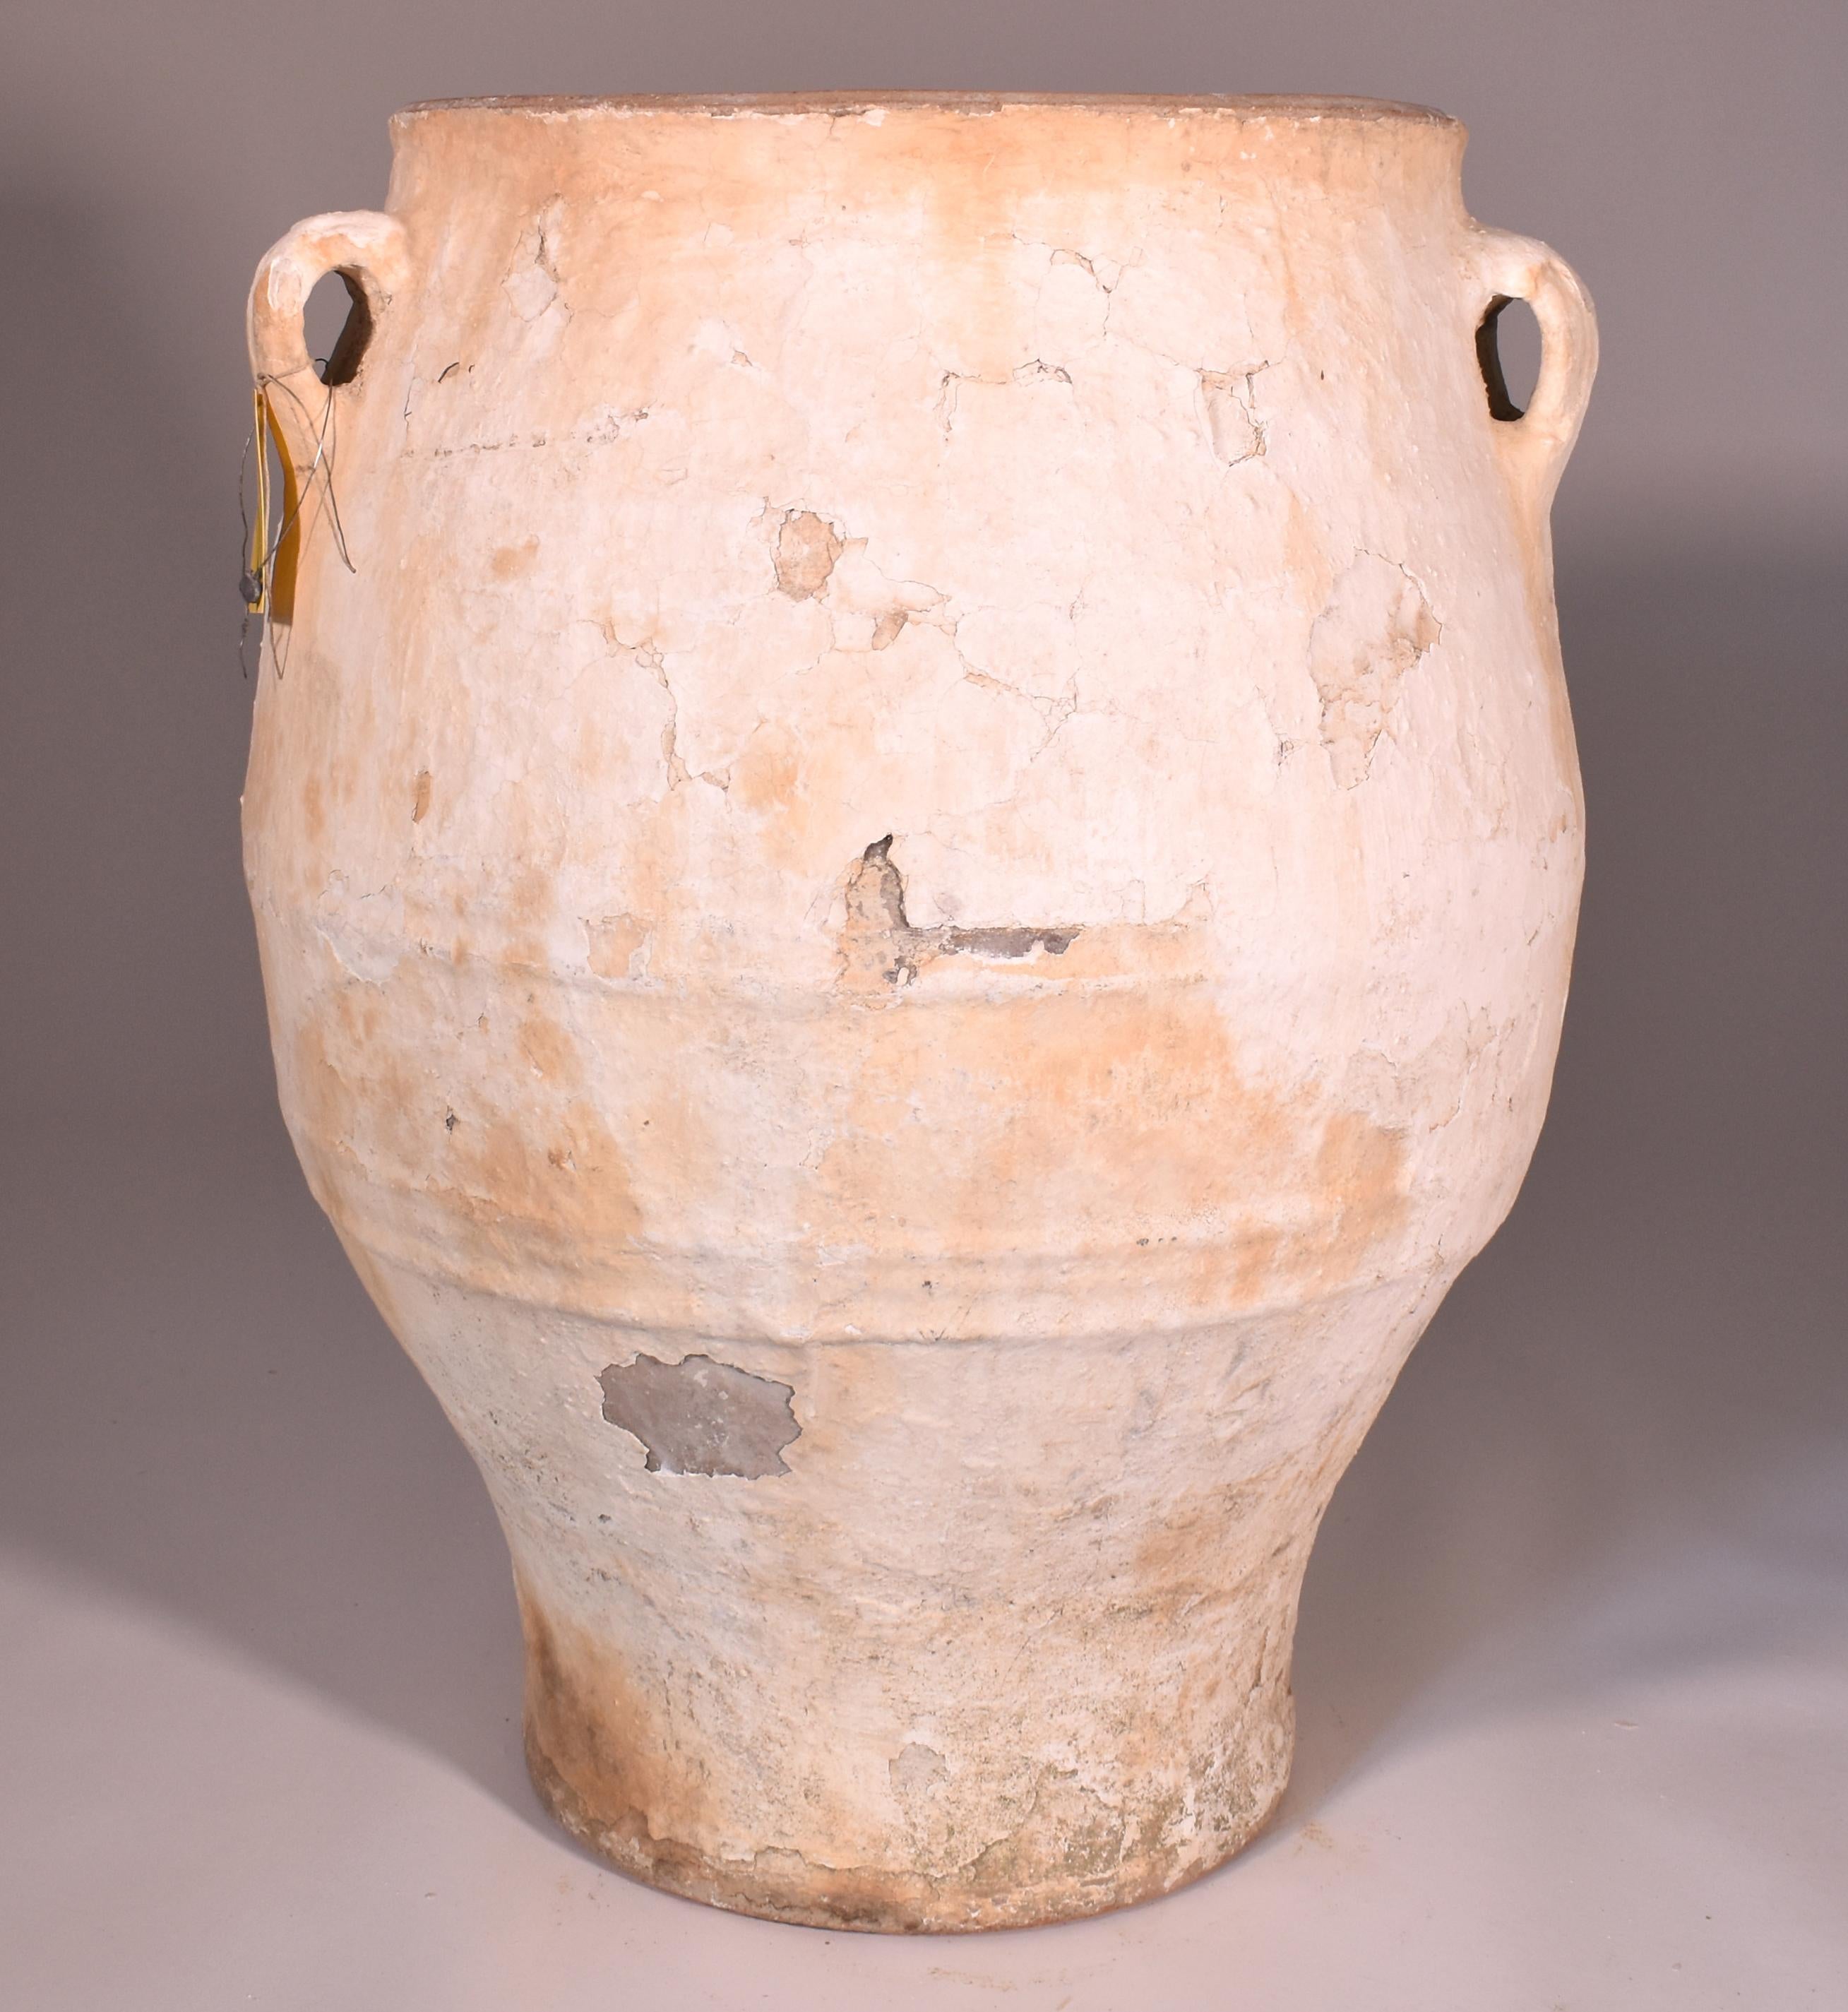 Large three-handled terracotta Jardiniere or Planter with white finish and gentle shape. I find these scattered across the elegant exteriors of homes in Southern France and Italy and use them in my own yard in New Orleans. The graceful silhouette